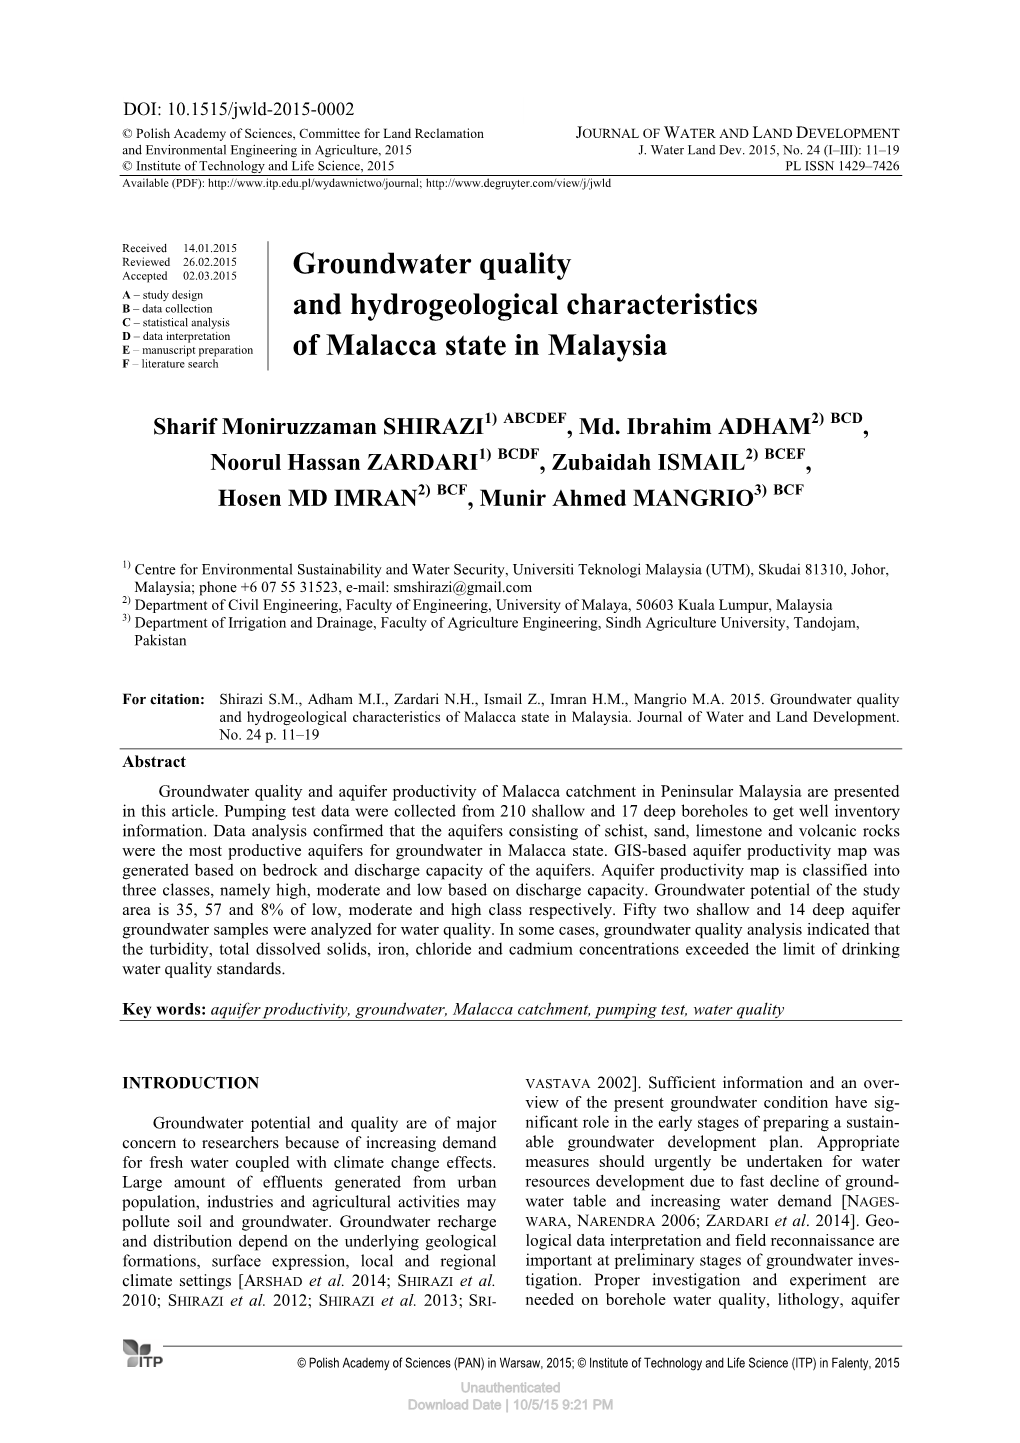 Groundwater Quality and Hydrogeological Characteristics of Malacca State in Malaysia